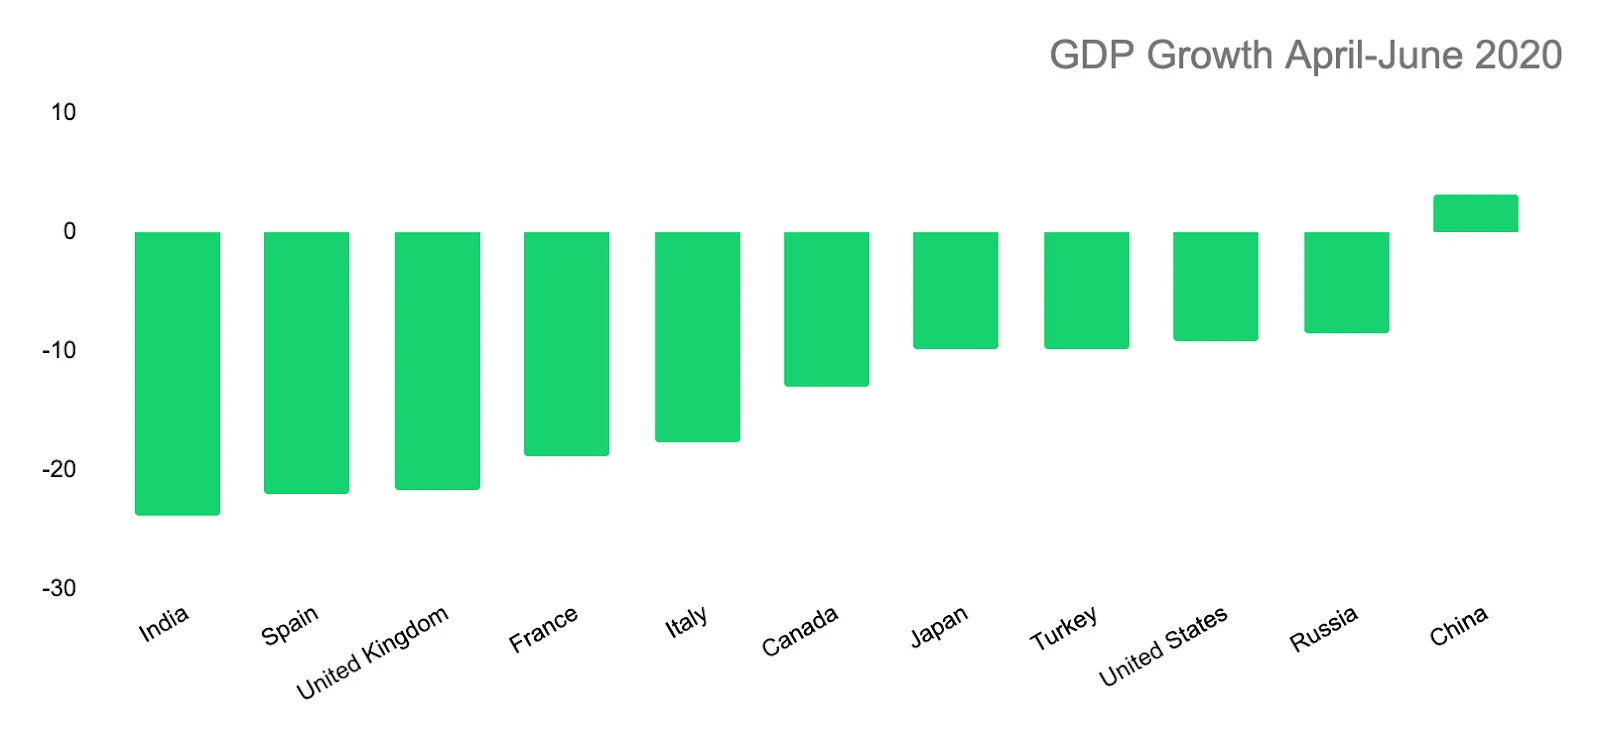 GDP Growth - Countries